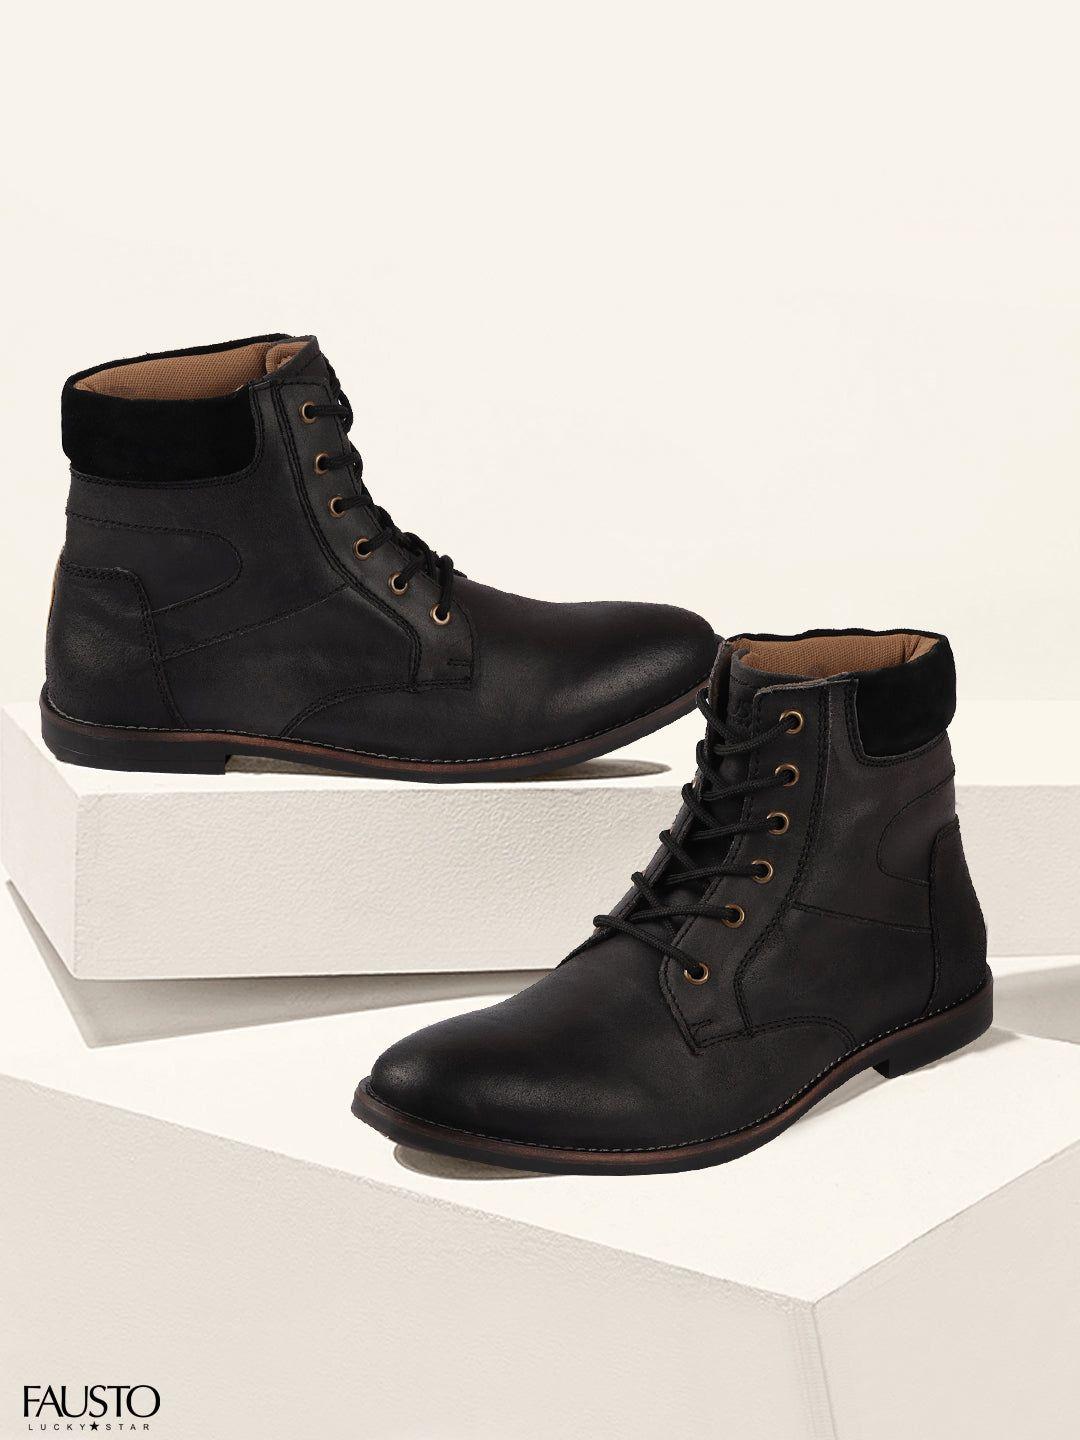 fausto men black leather high-top flat boots